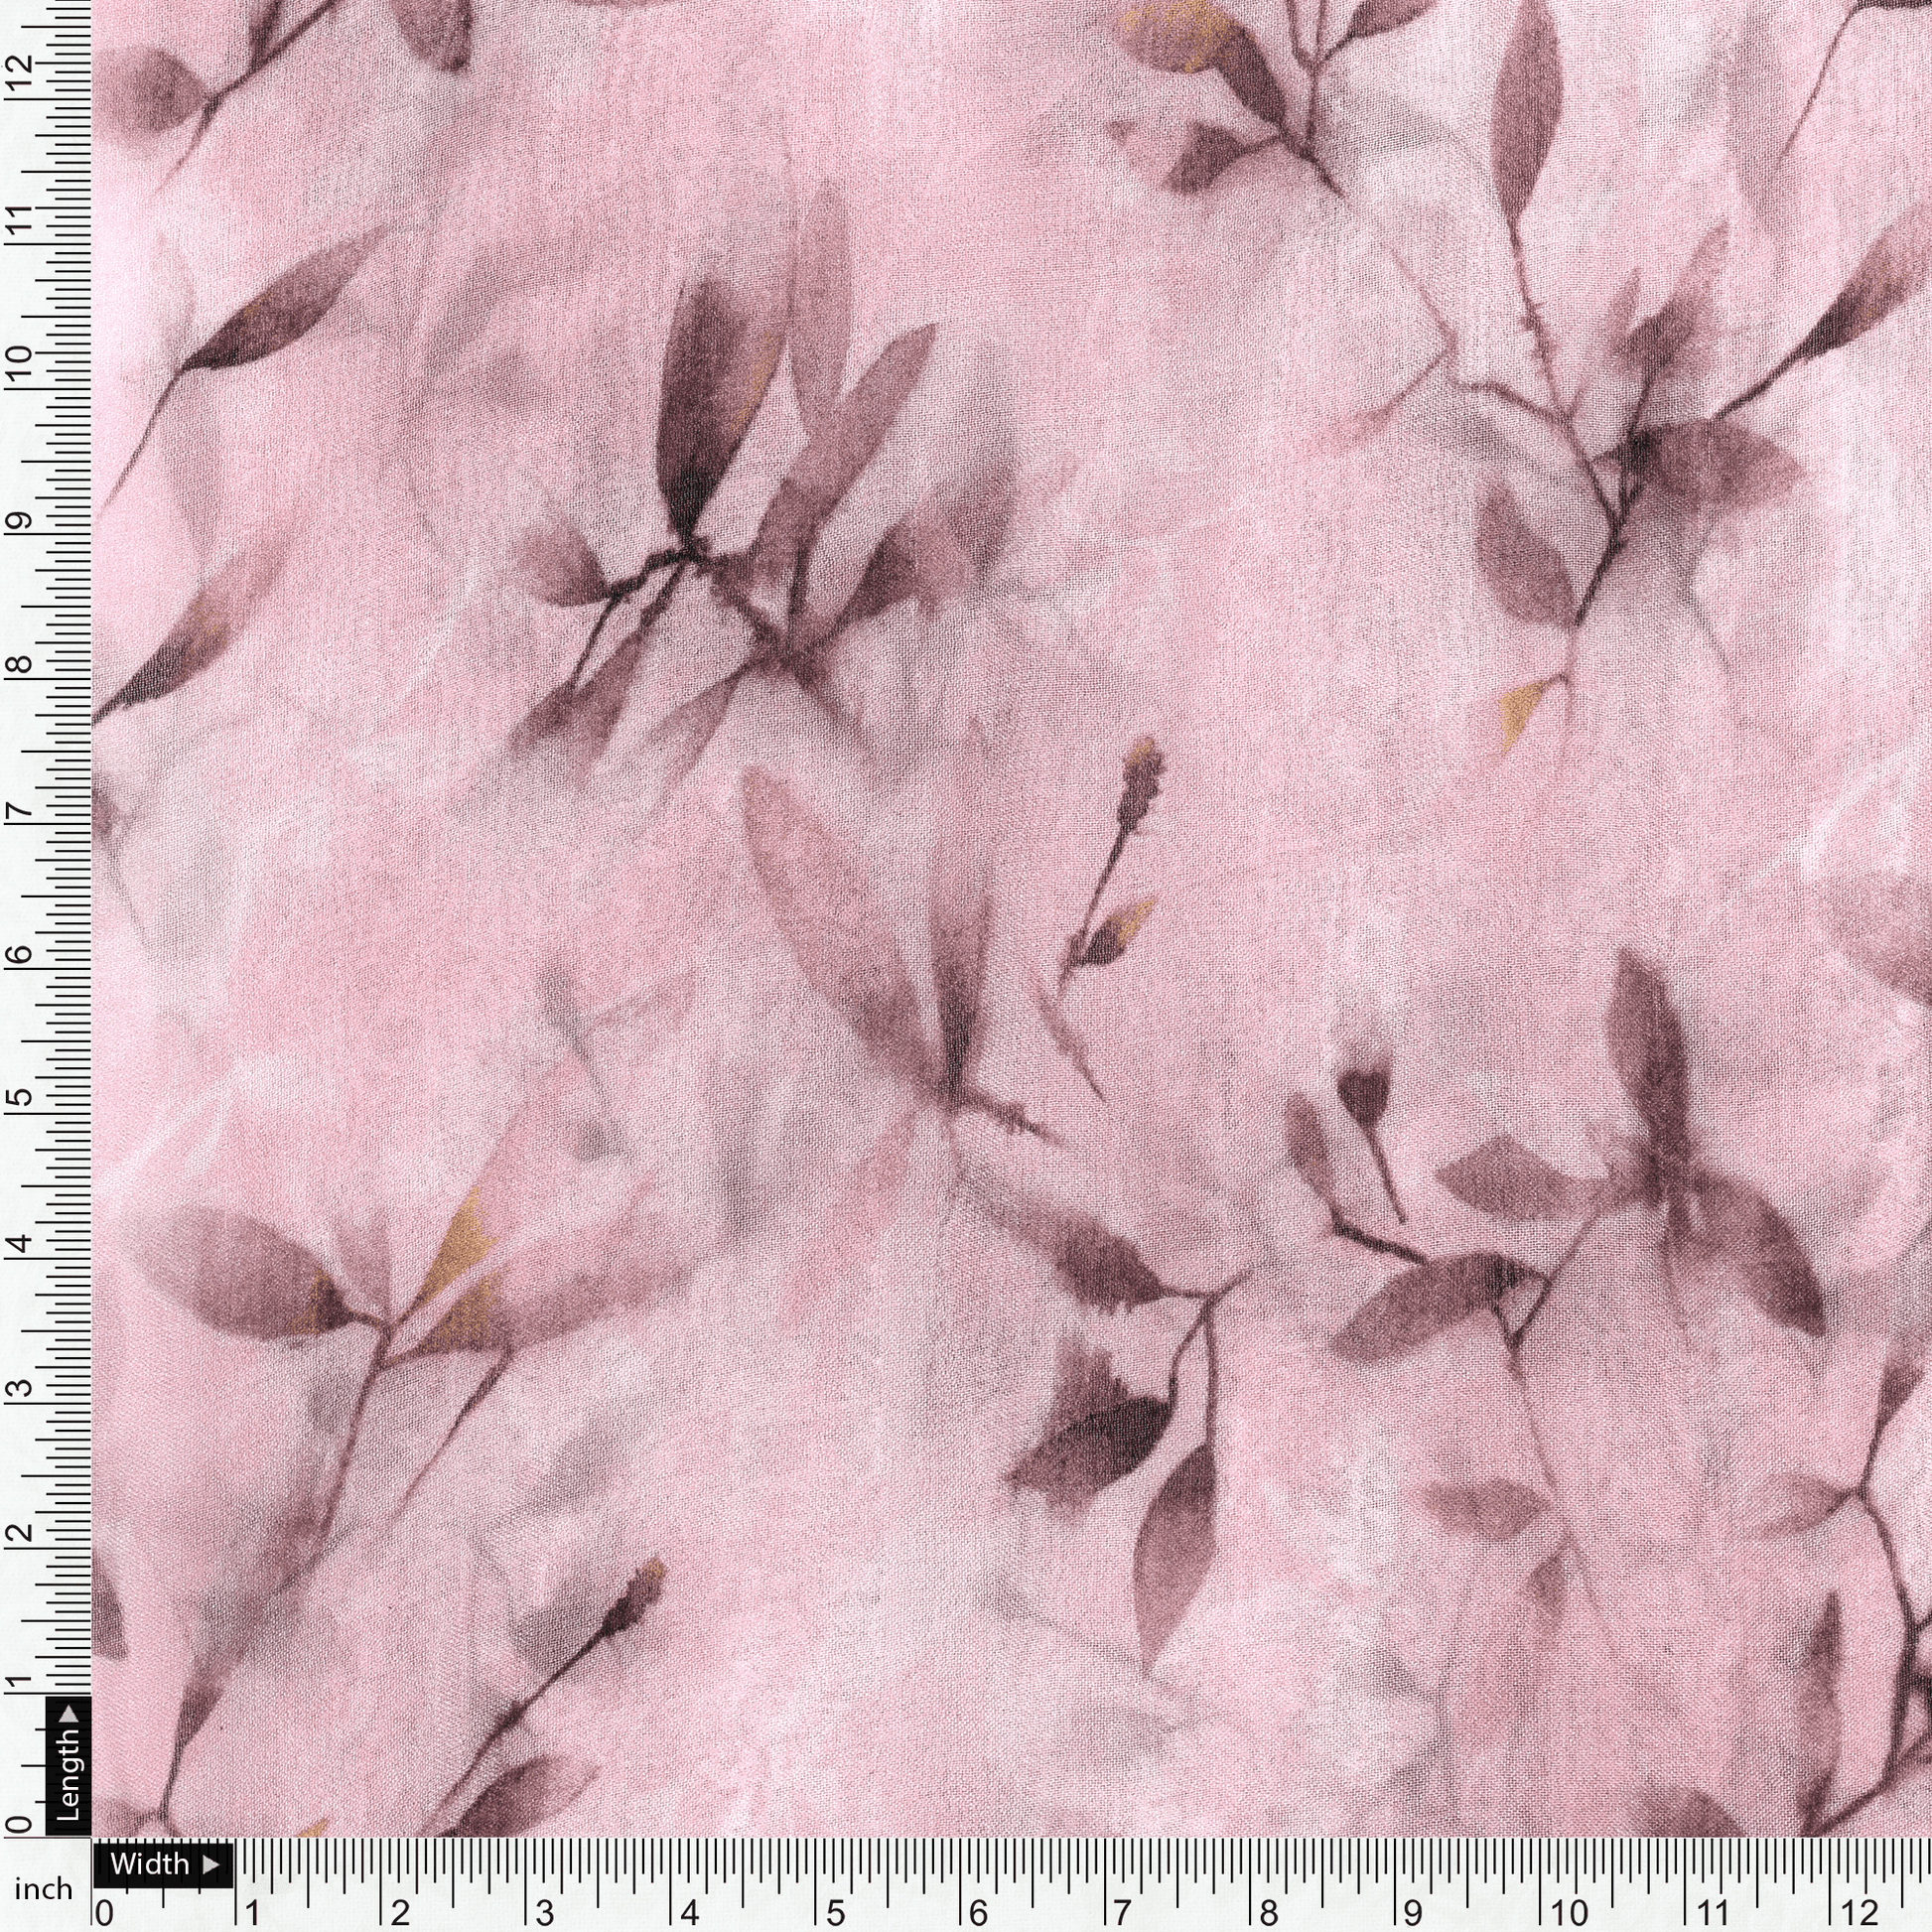 Pinkish Thin And Light Leaves Digital Printed Fabric - Pure Georgette - FAB VOGUE Studio®